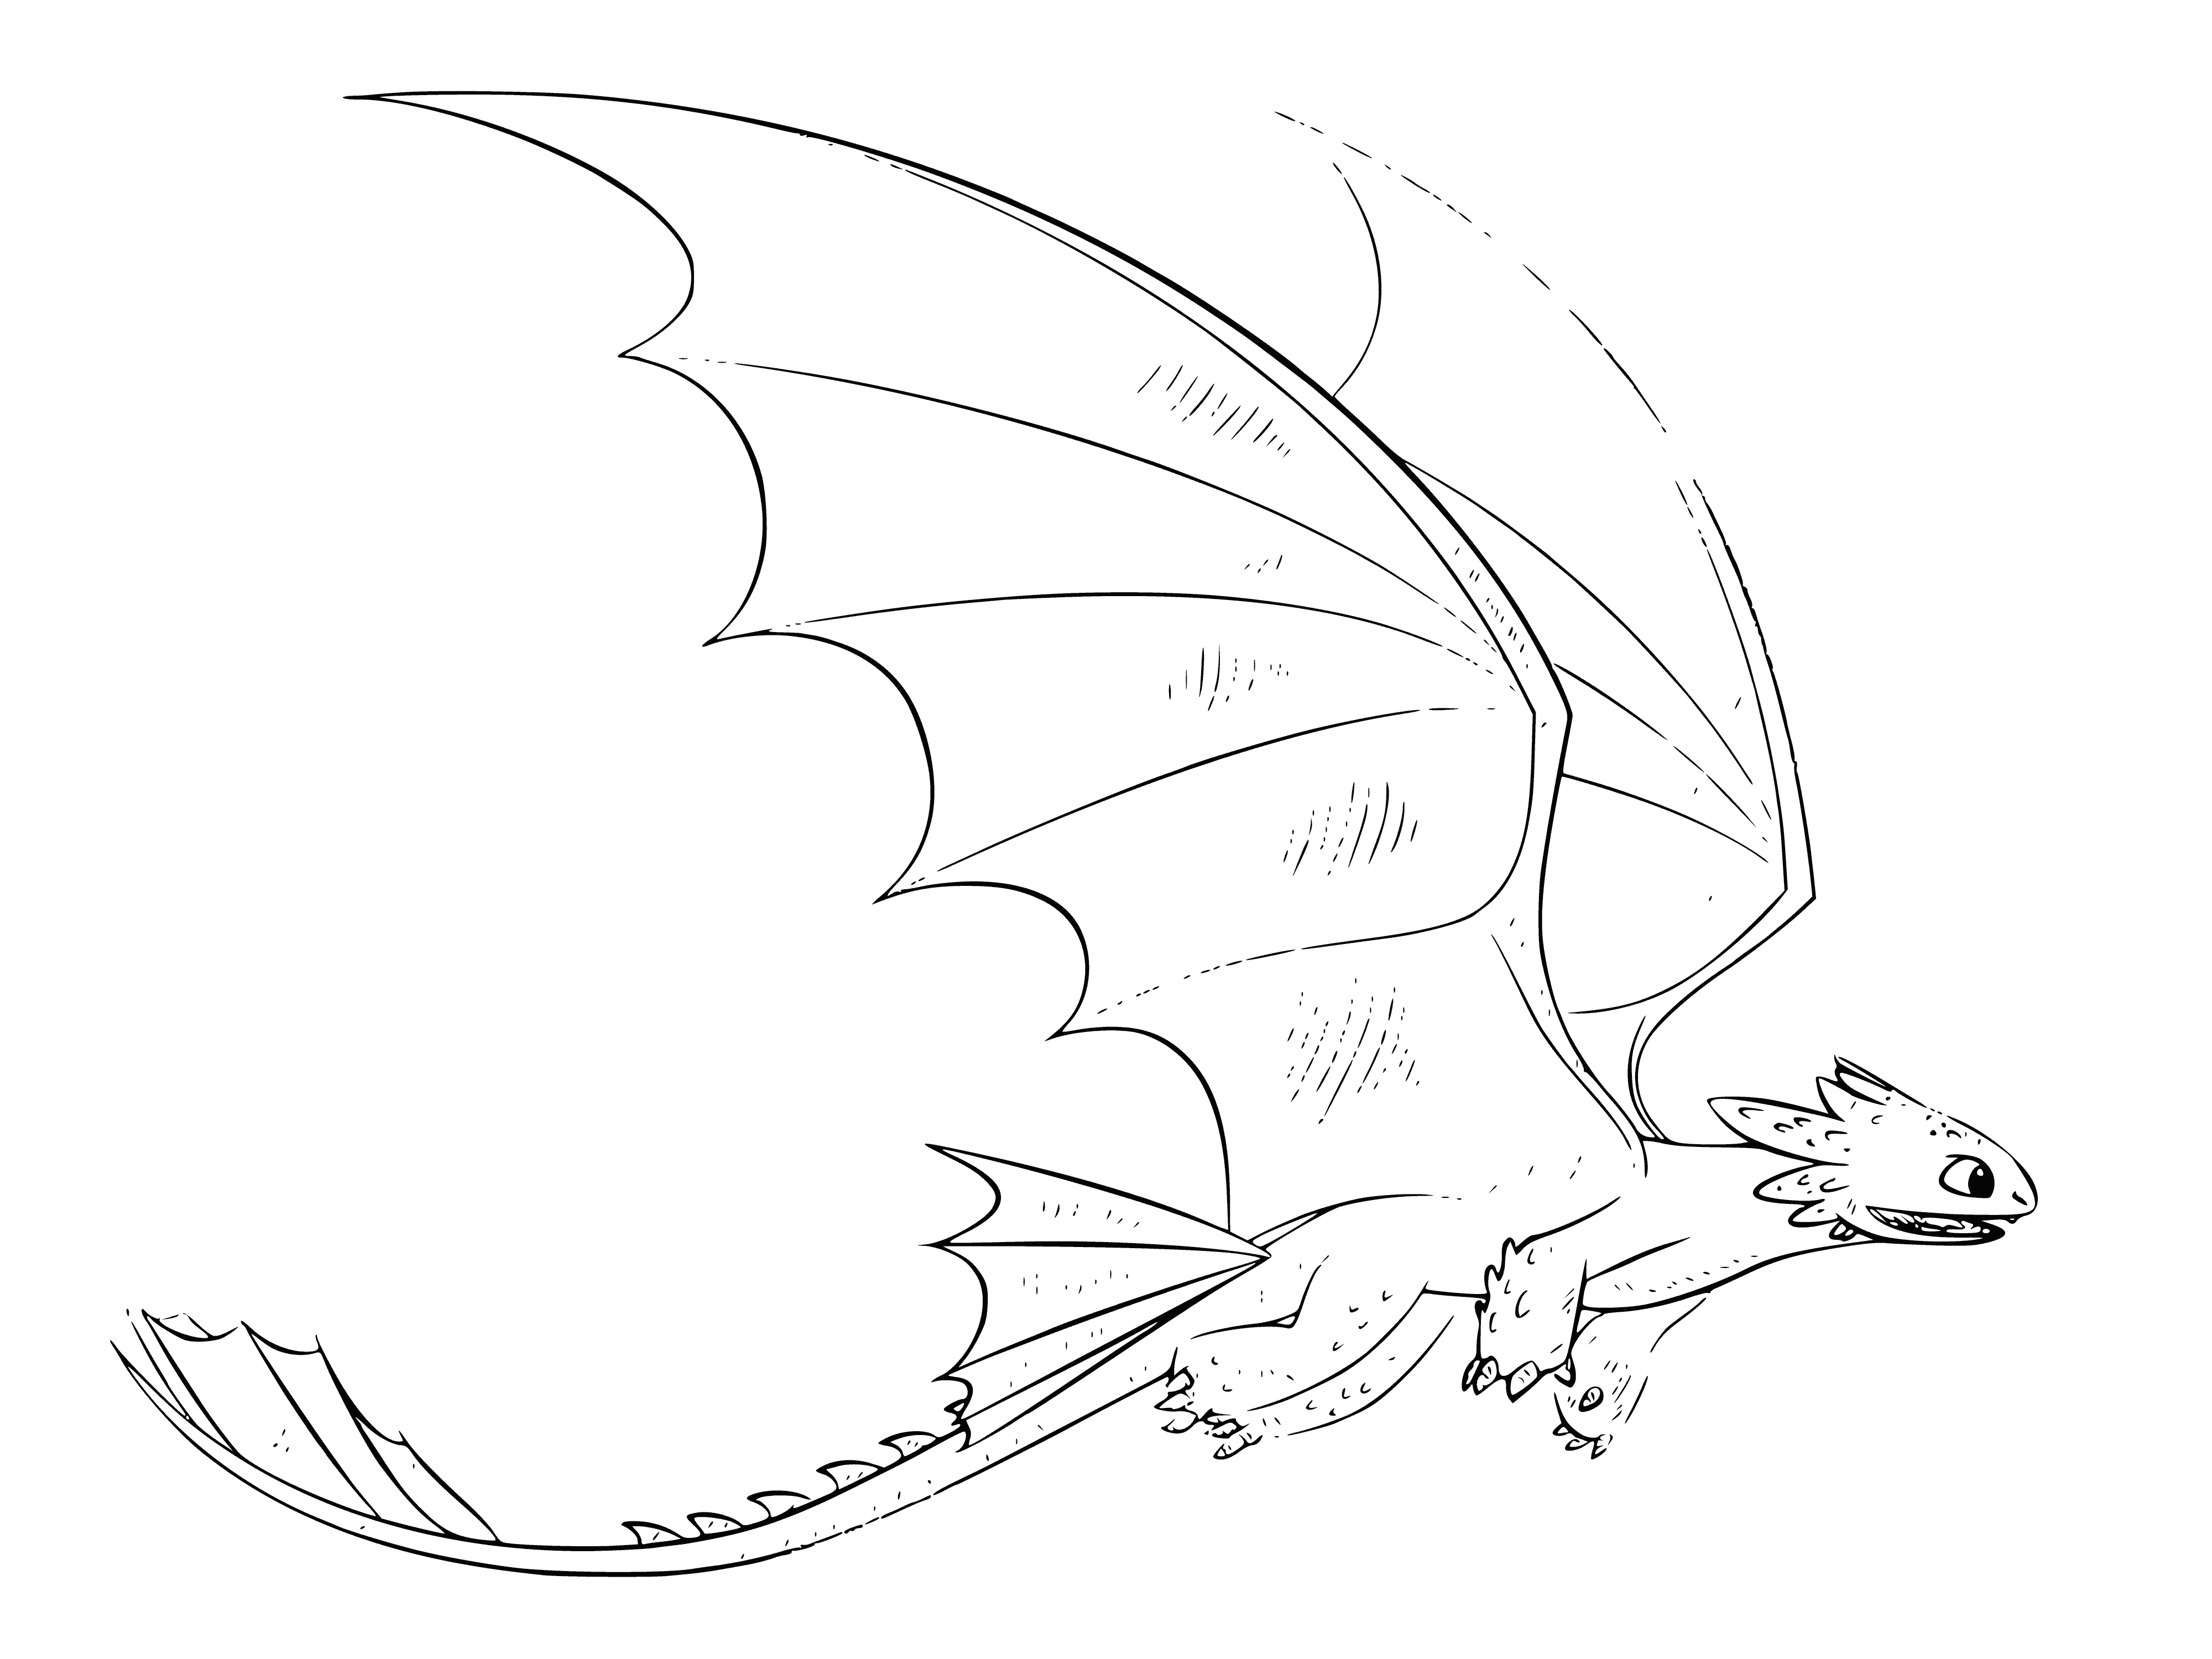 coloring page: Dragon with black scales & blue eyes flying above body of water, wings spread, revealing sharp teeth.